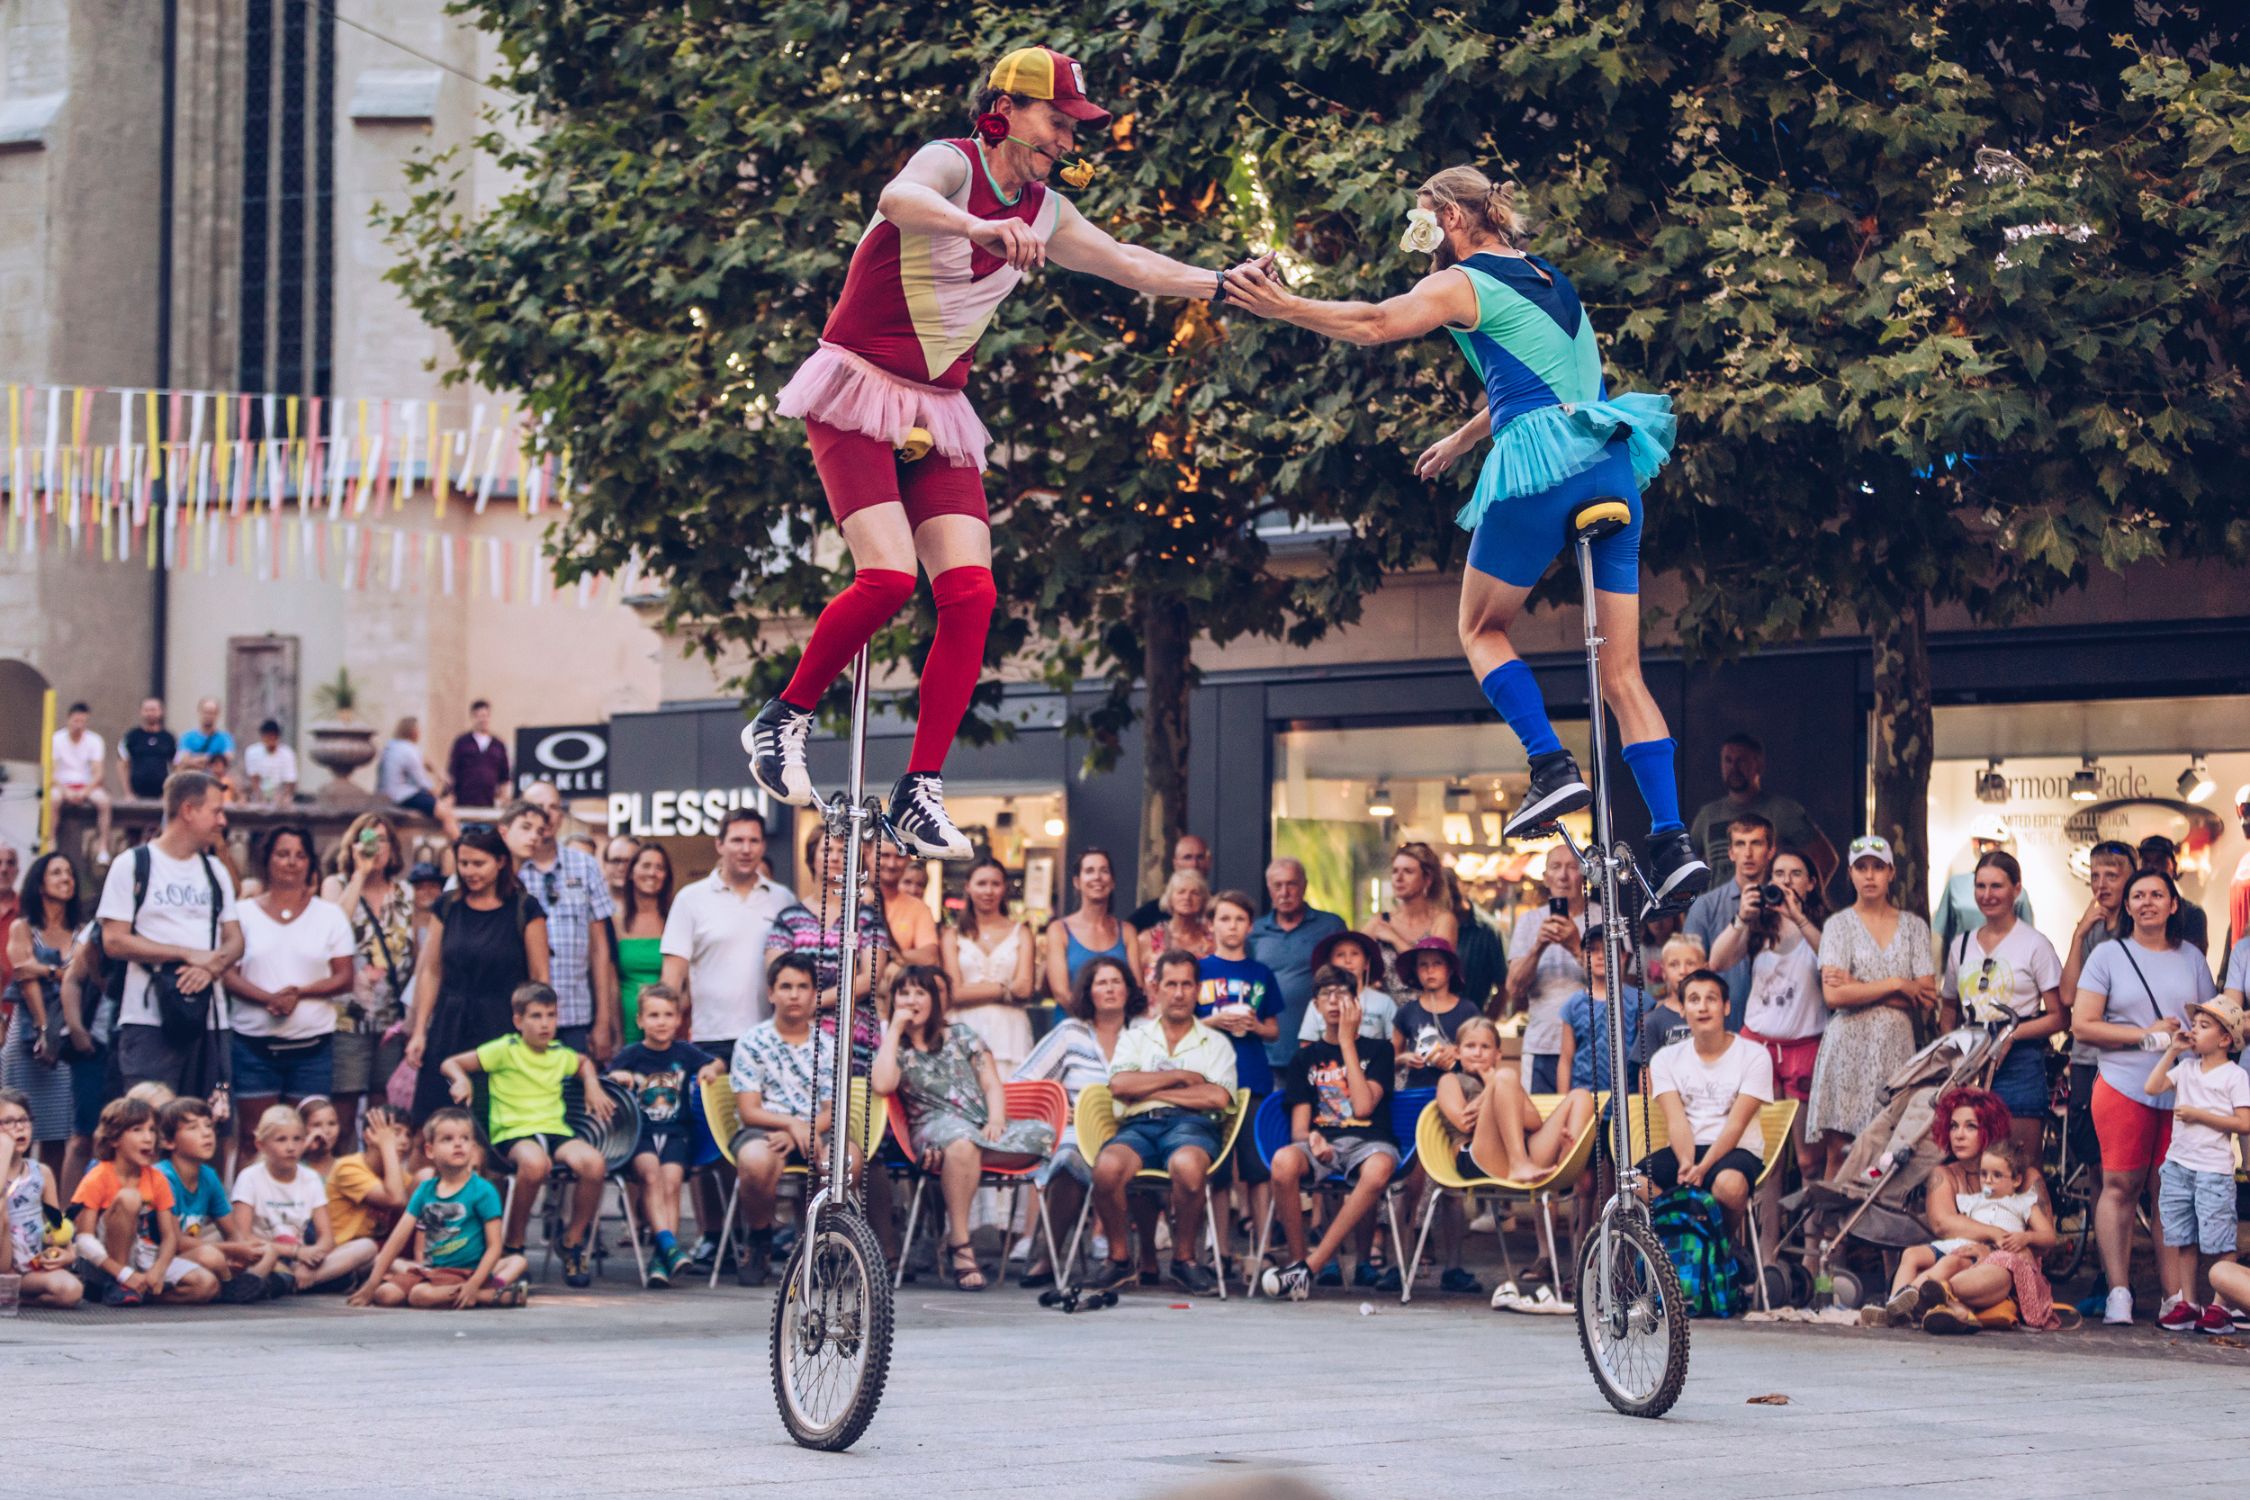 Two artists on unicycles surrounded by enthusiastic spectators